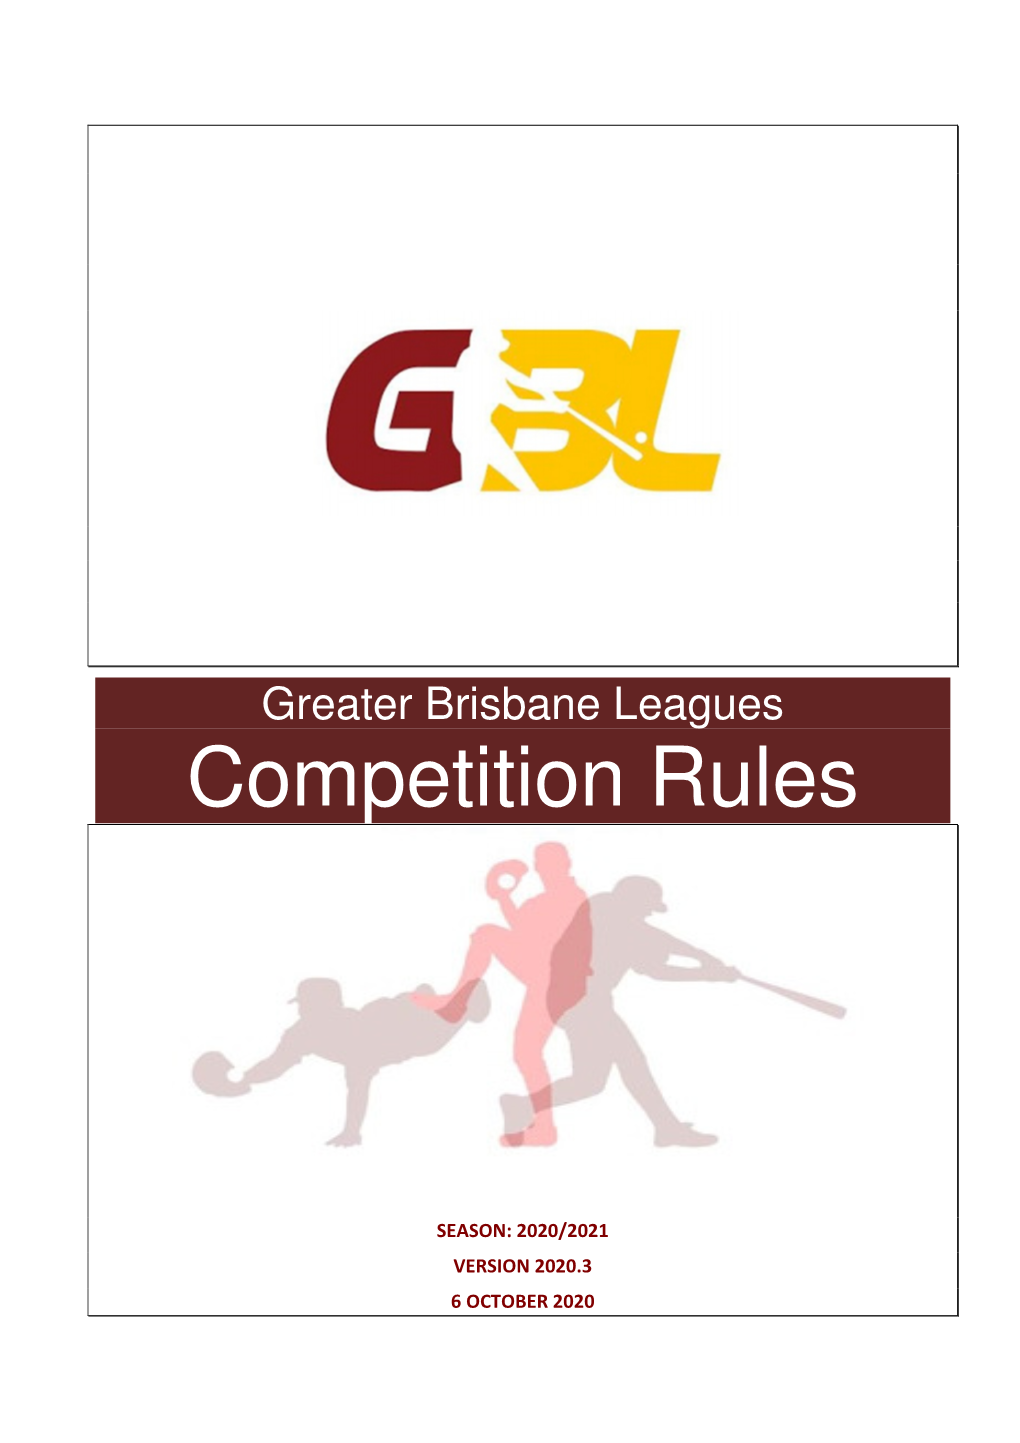 GBL Competition Rules